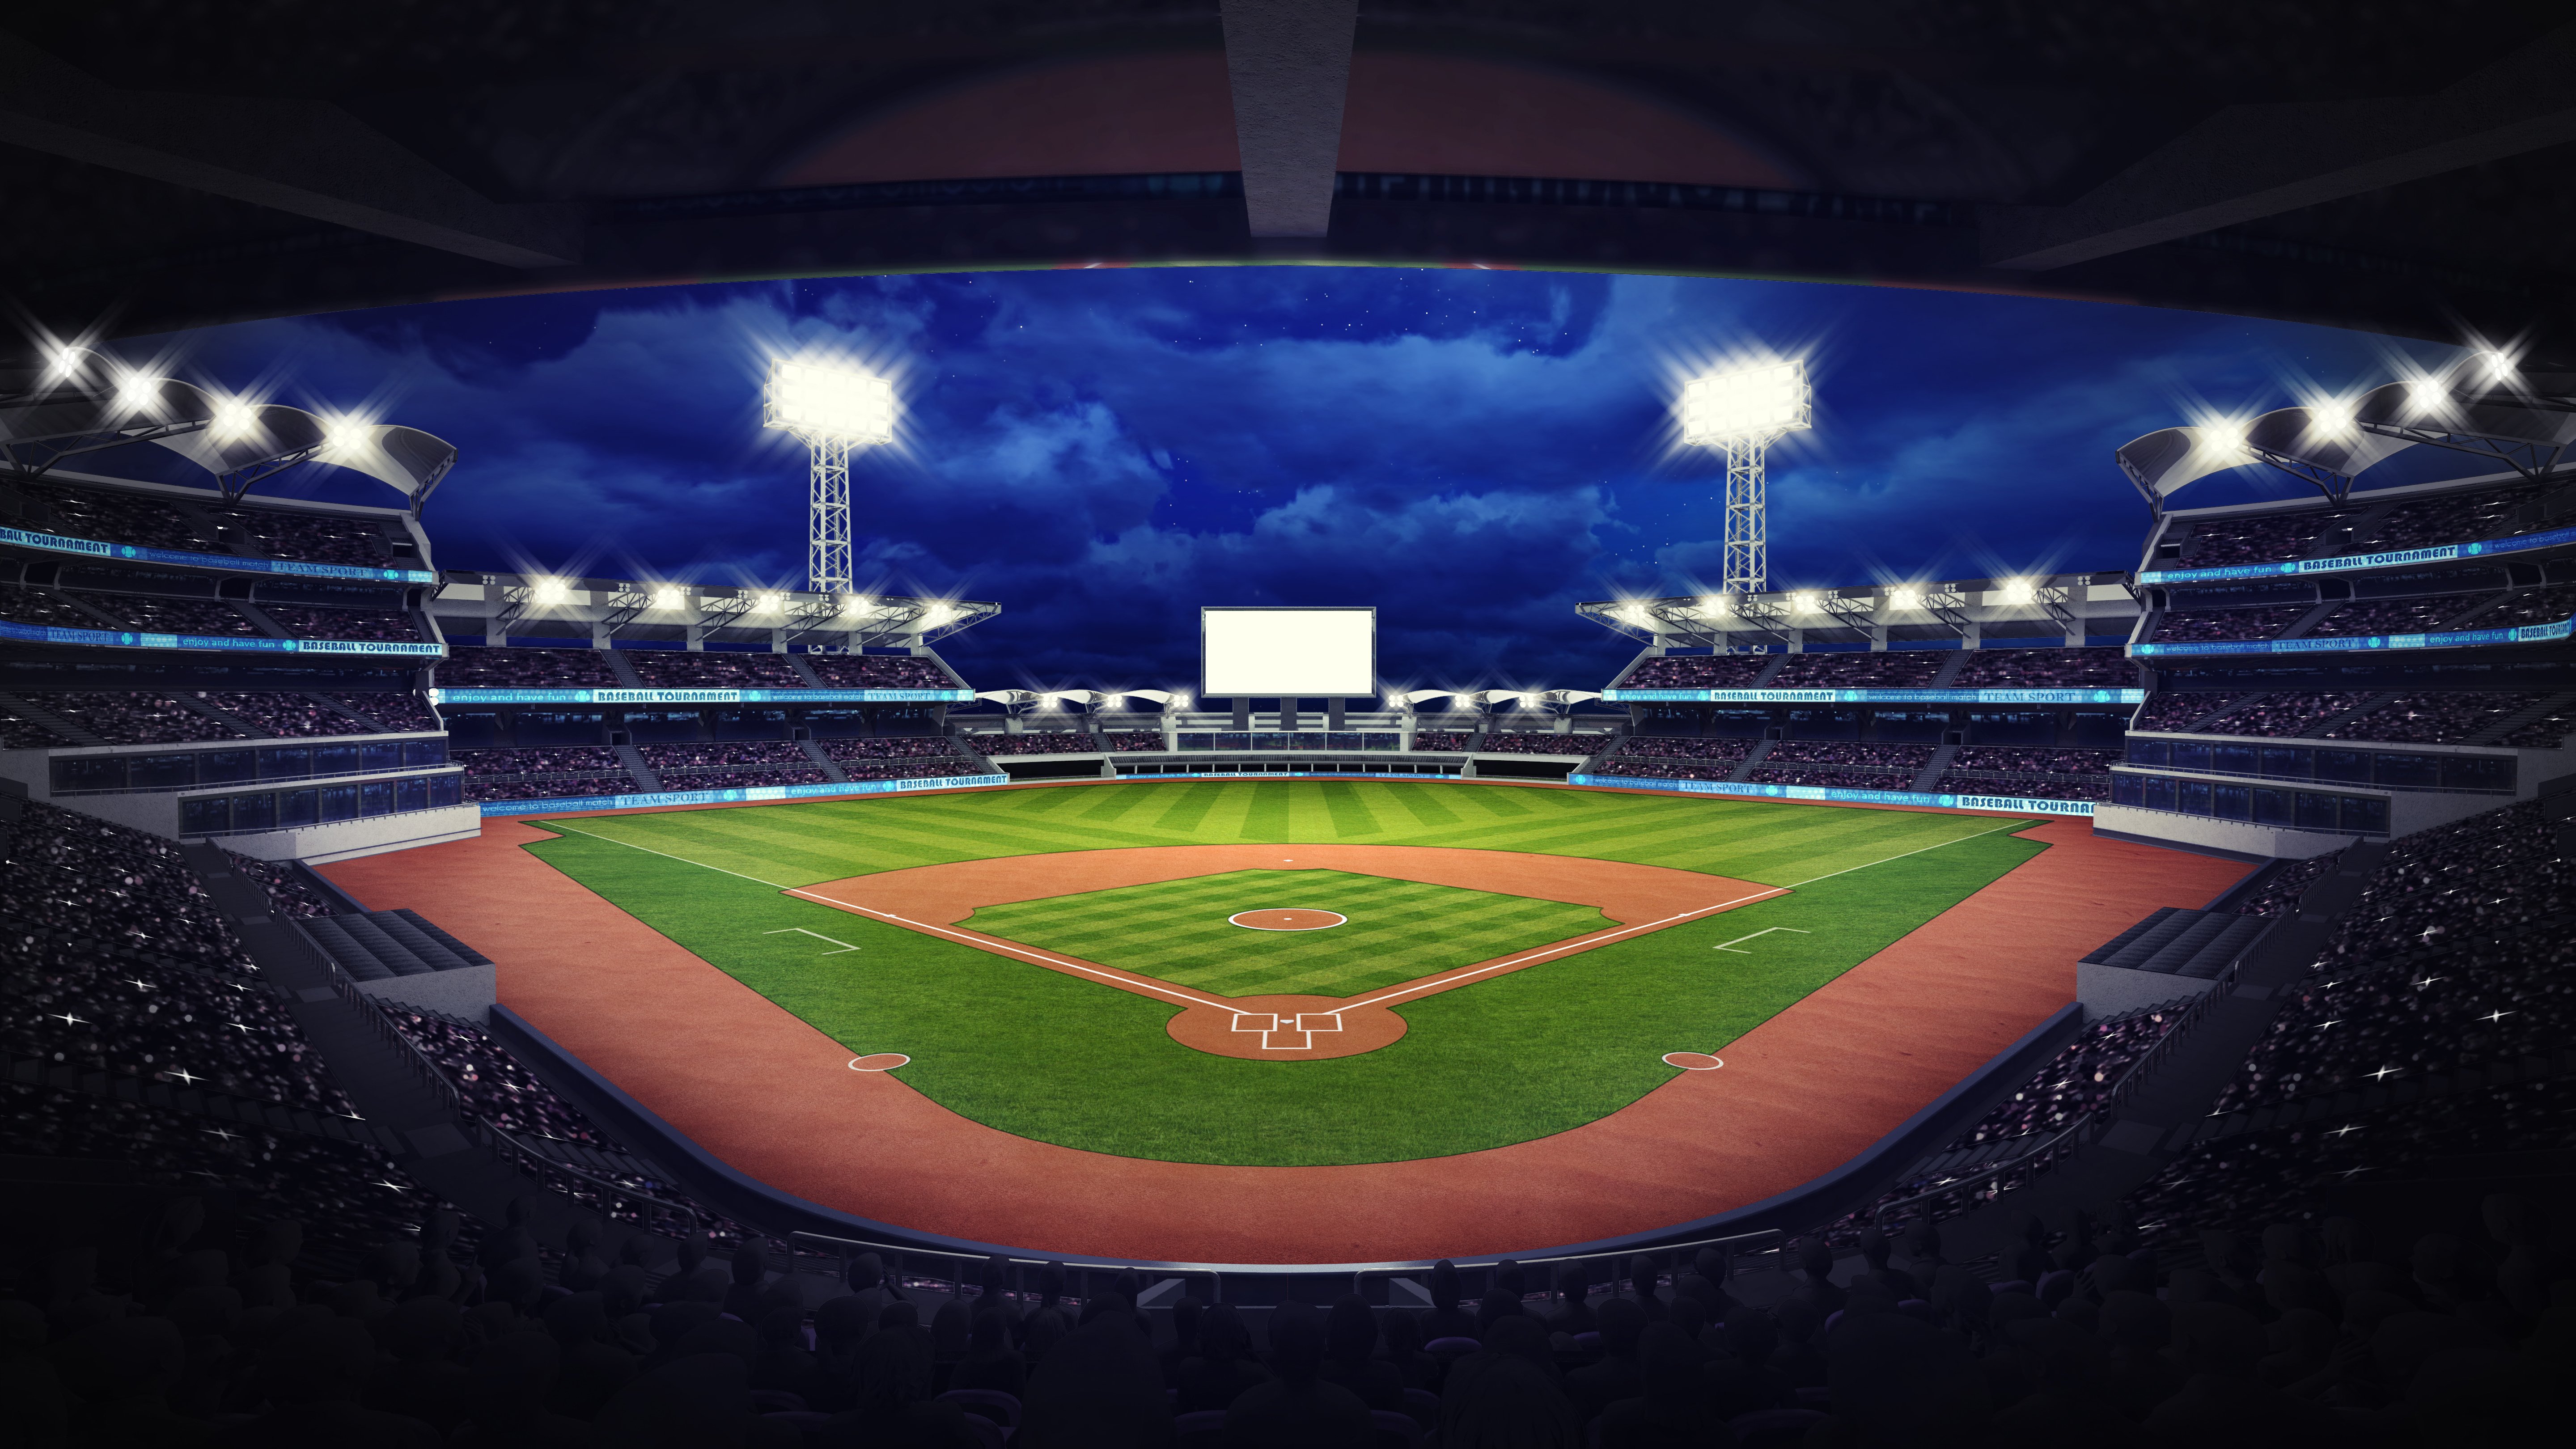 A baseball stadium under roof view with fans | Photo: Shutterstock